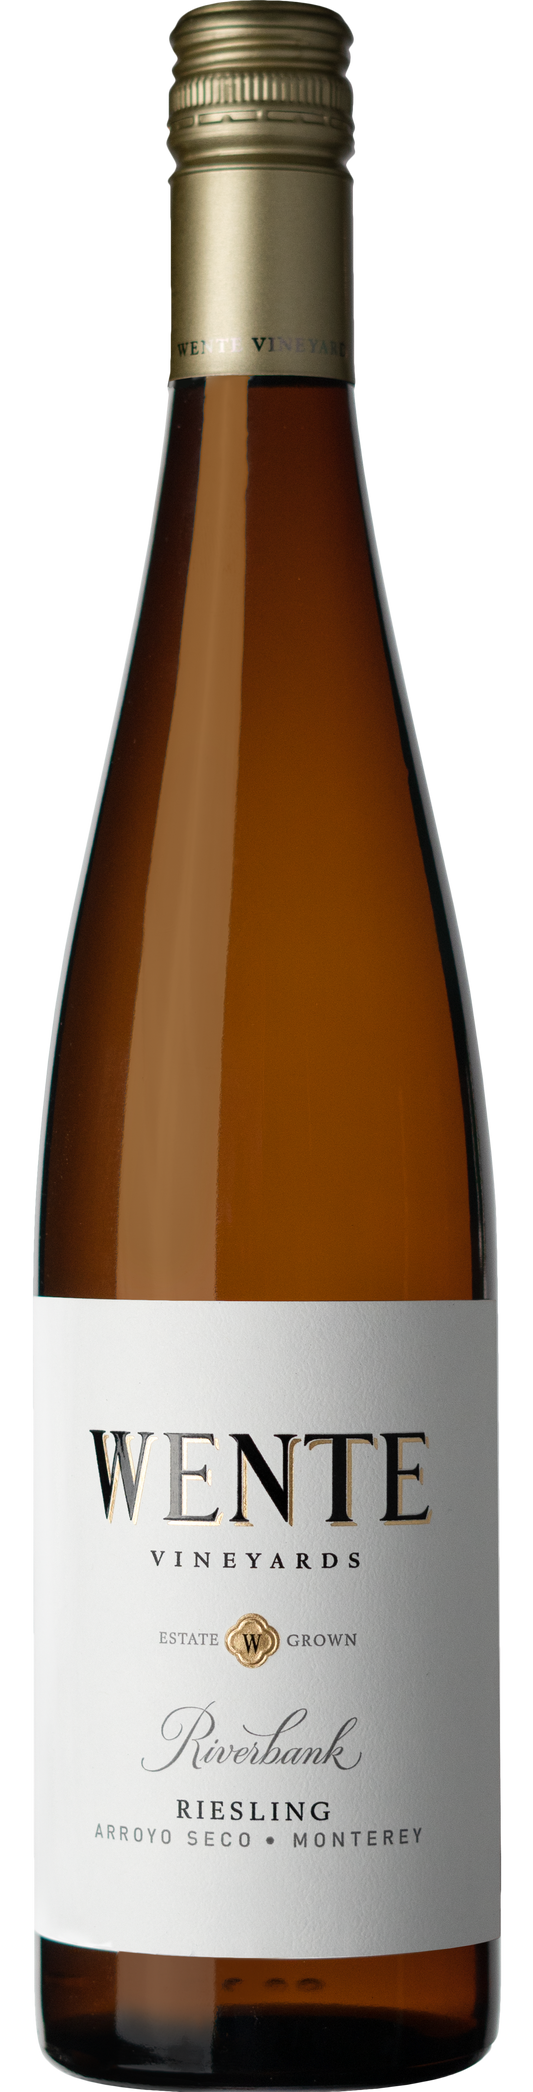 Wente Riverbank Riesling - Premium White Wine from Wente Vineyards - Shop now at Whiskery